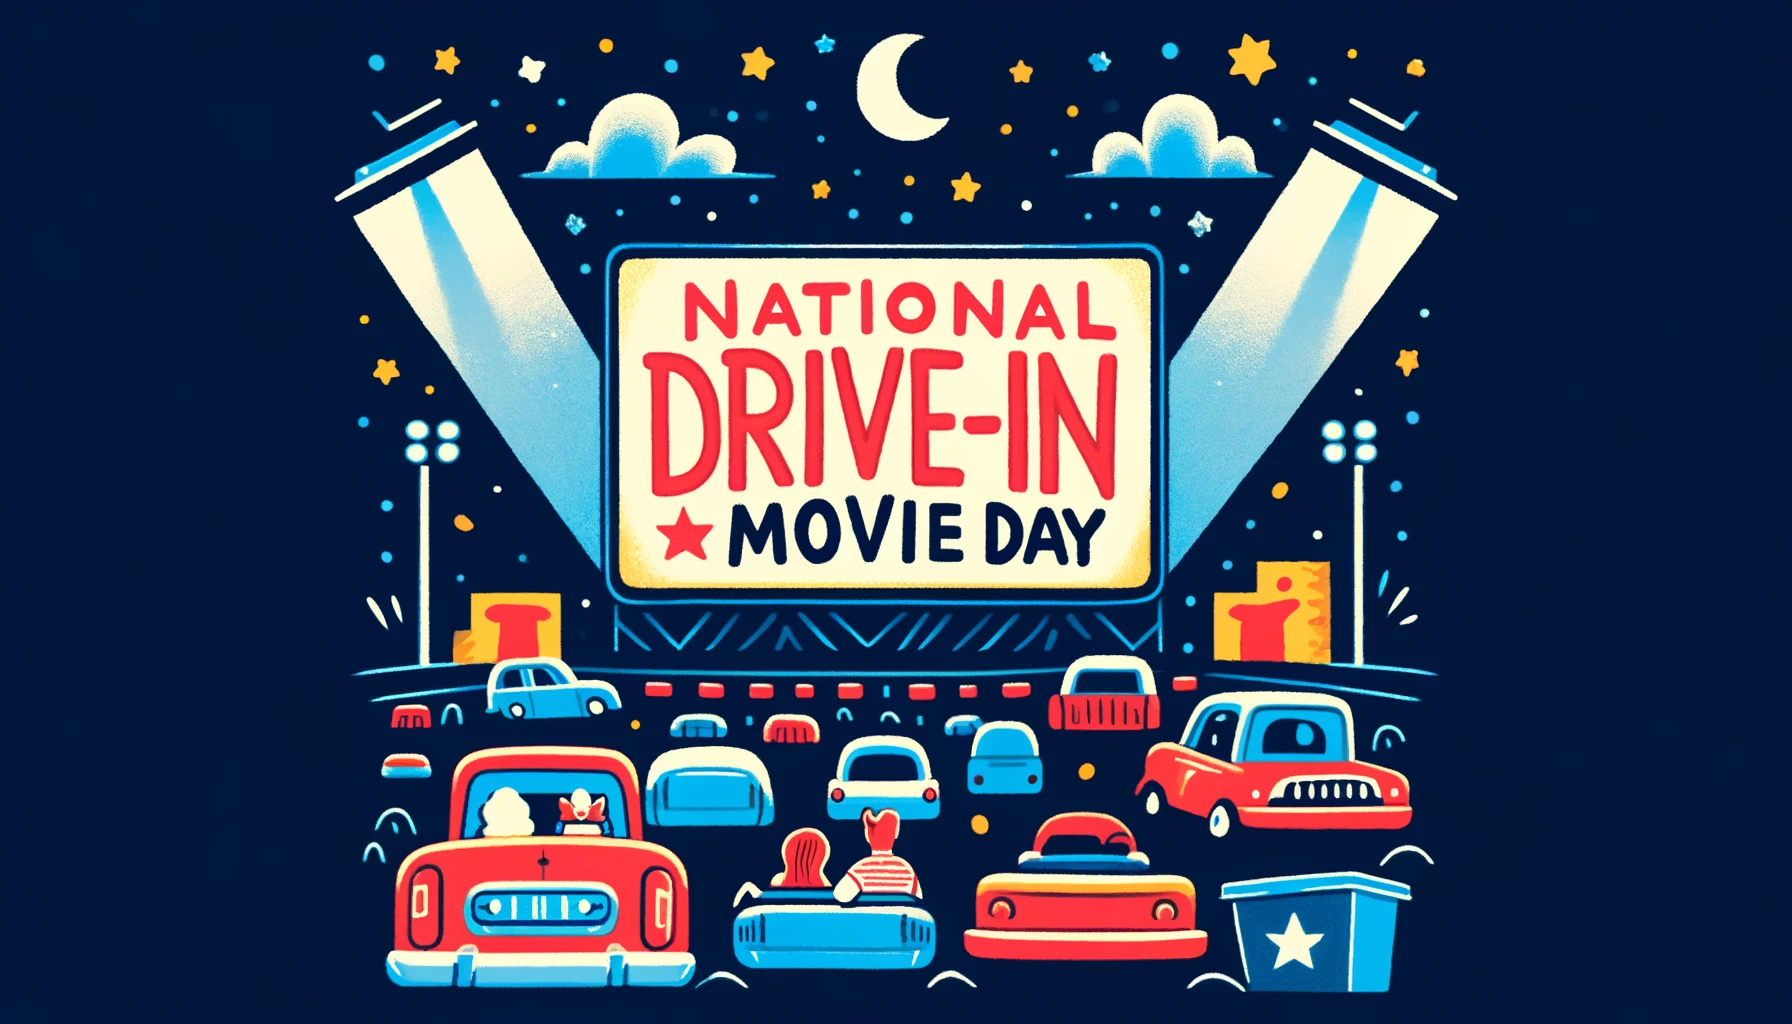 National Drive-In Movie Day